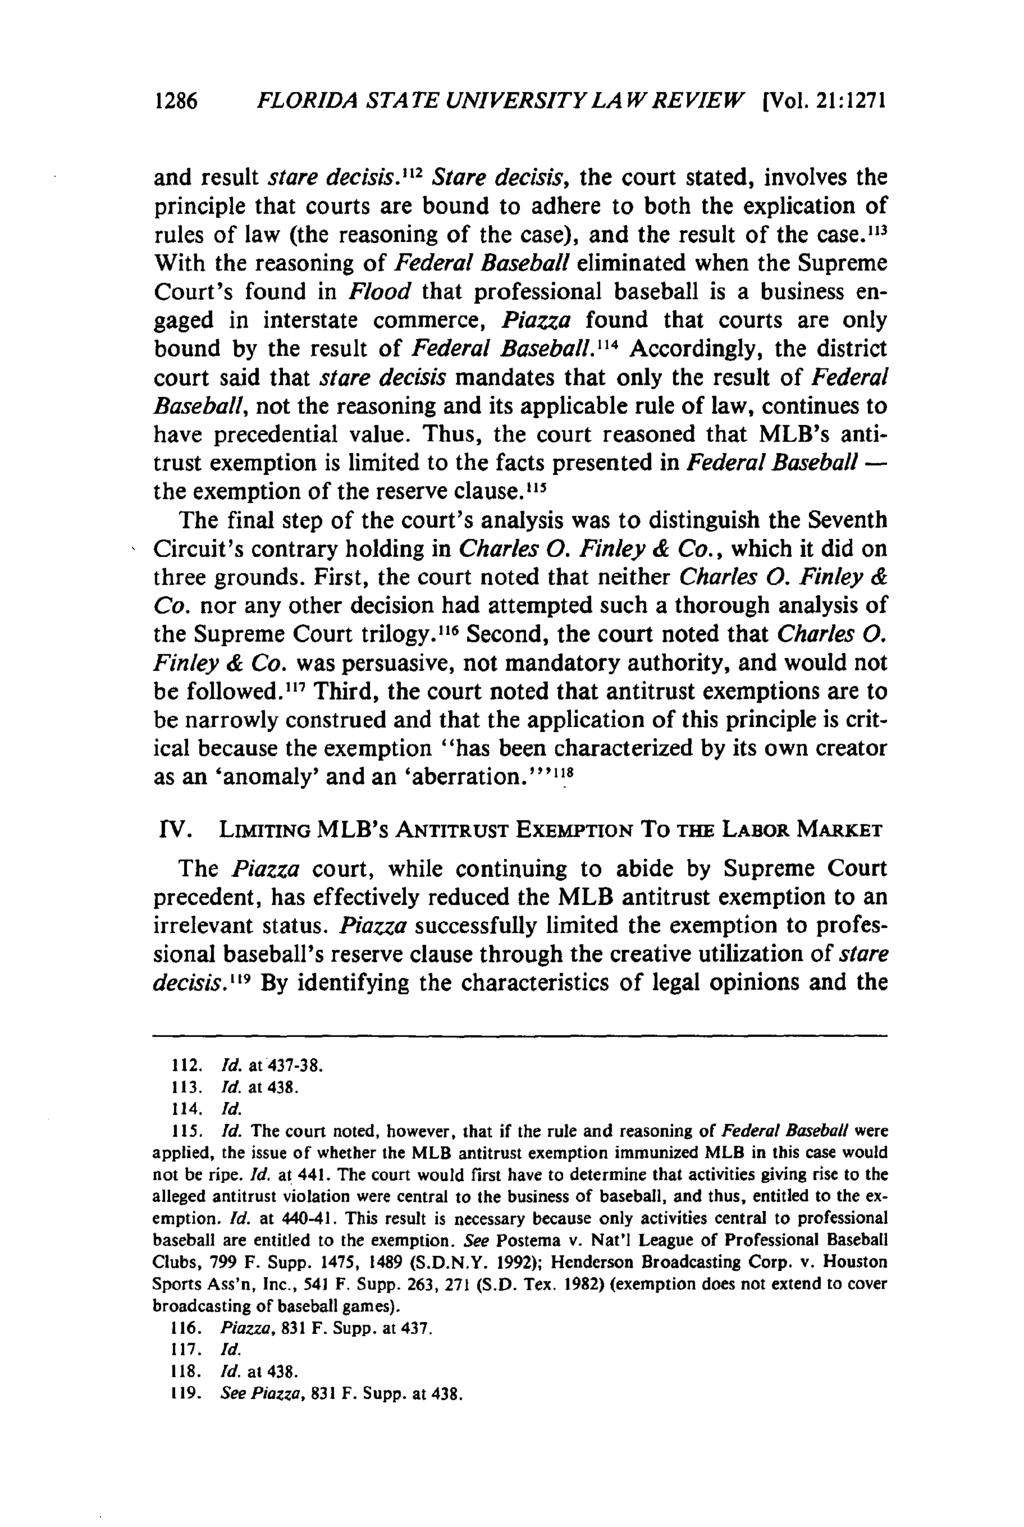 1286 FLORIDA STATE UNIVERSITYLAWREVIEW [Vol. 21:1271 and result stare decisis.